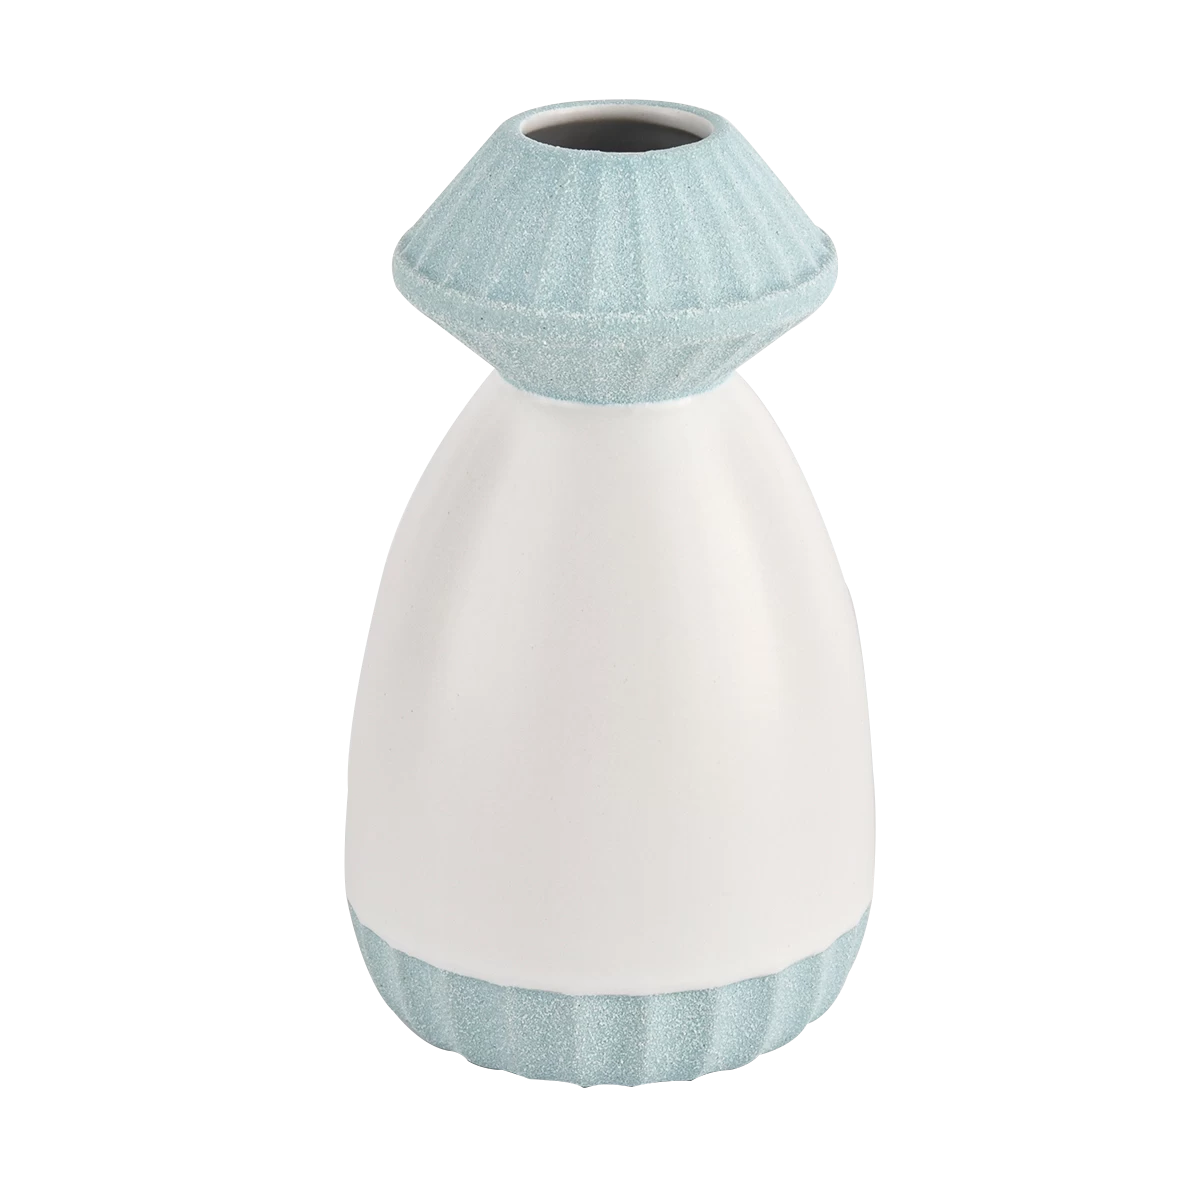 Wholesale suppliers of modern design ceramic reed diffuser bottles